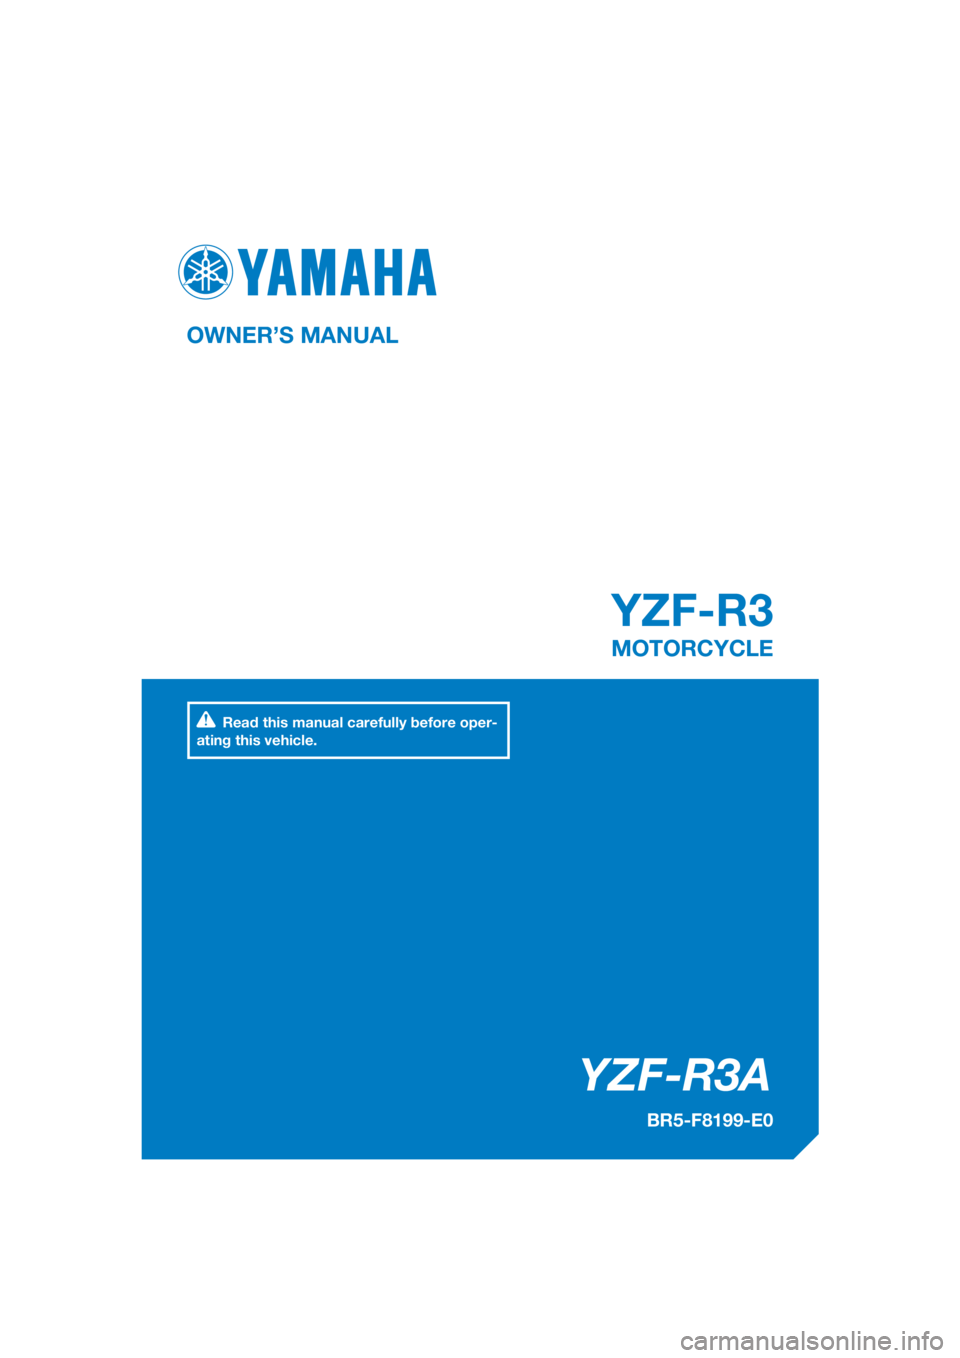 YAMAHA YZF-R3 2018  Owners Manual DIC183
YZF-R3
   YZF-R3A
OWNER’S MANUAL
BR5-F8199-E0
MOTORCYCLE
[English  (E)]
Read this manual carefully before oper-
ating this vehicle. 